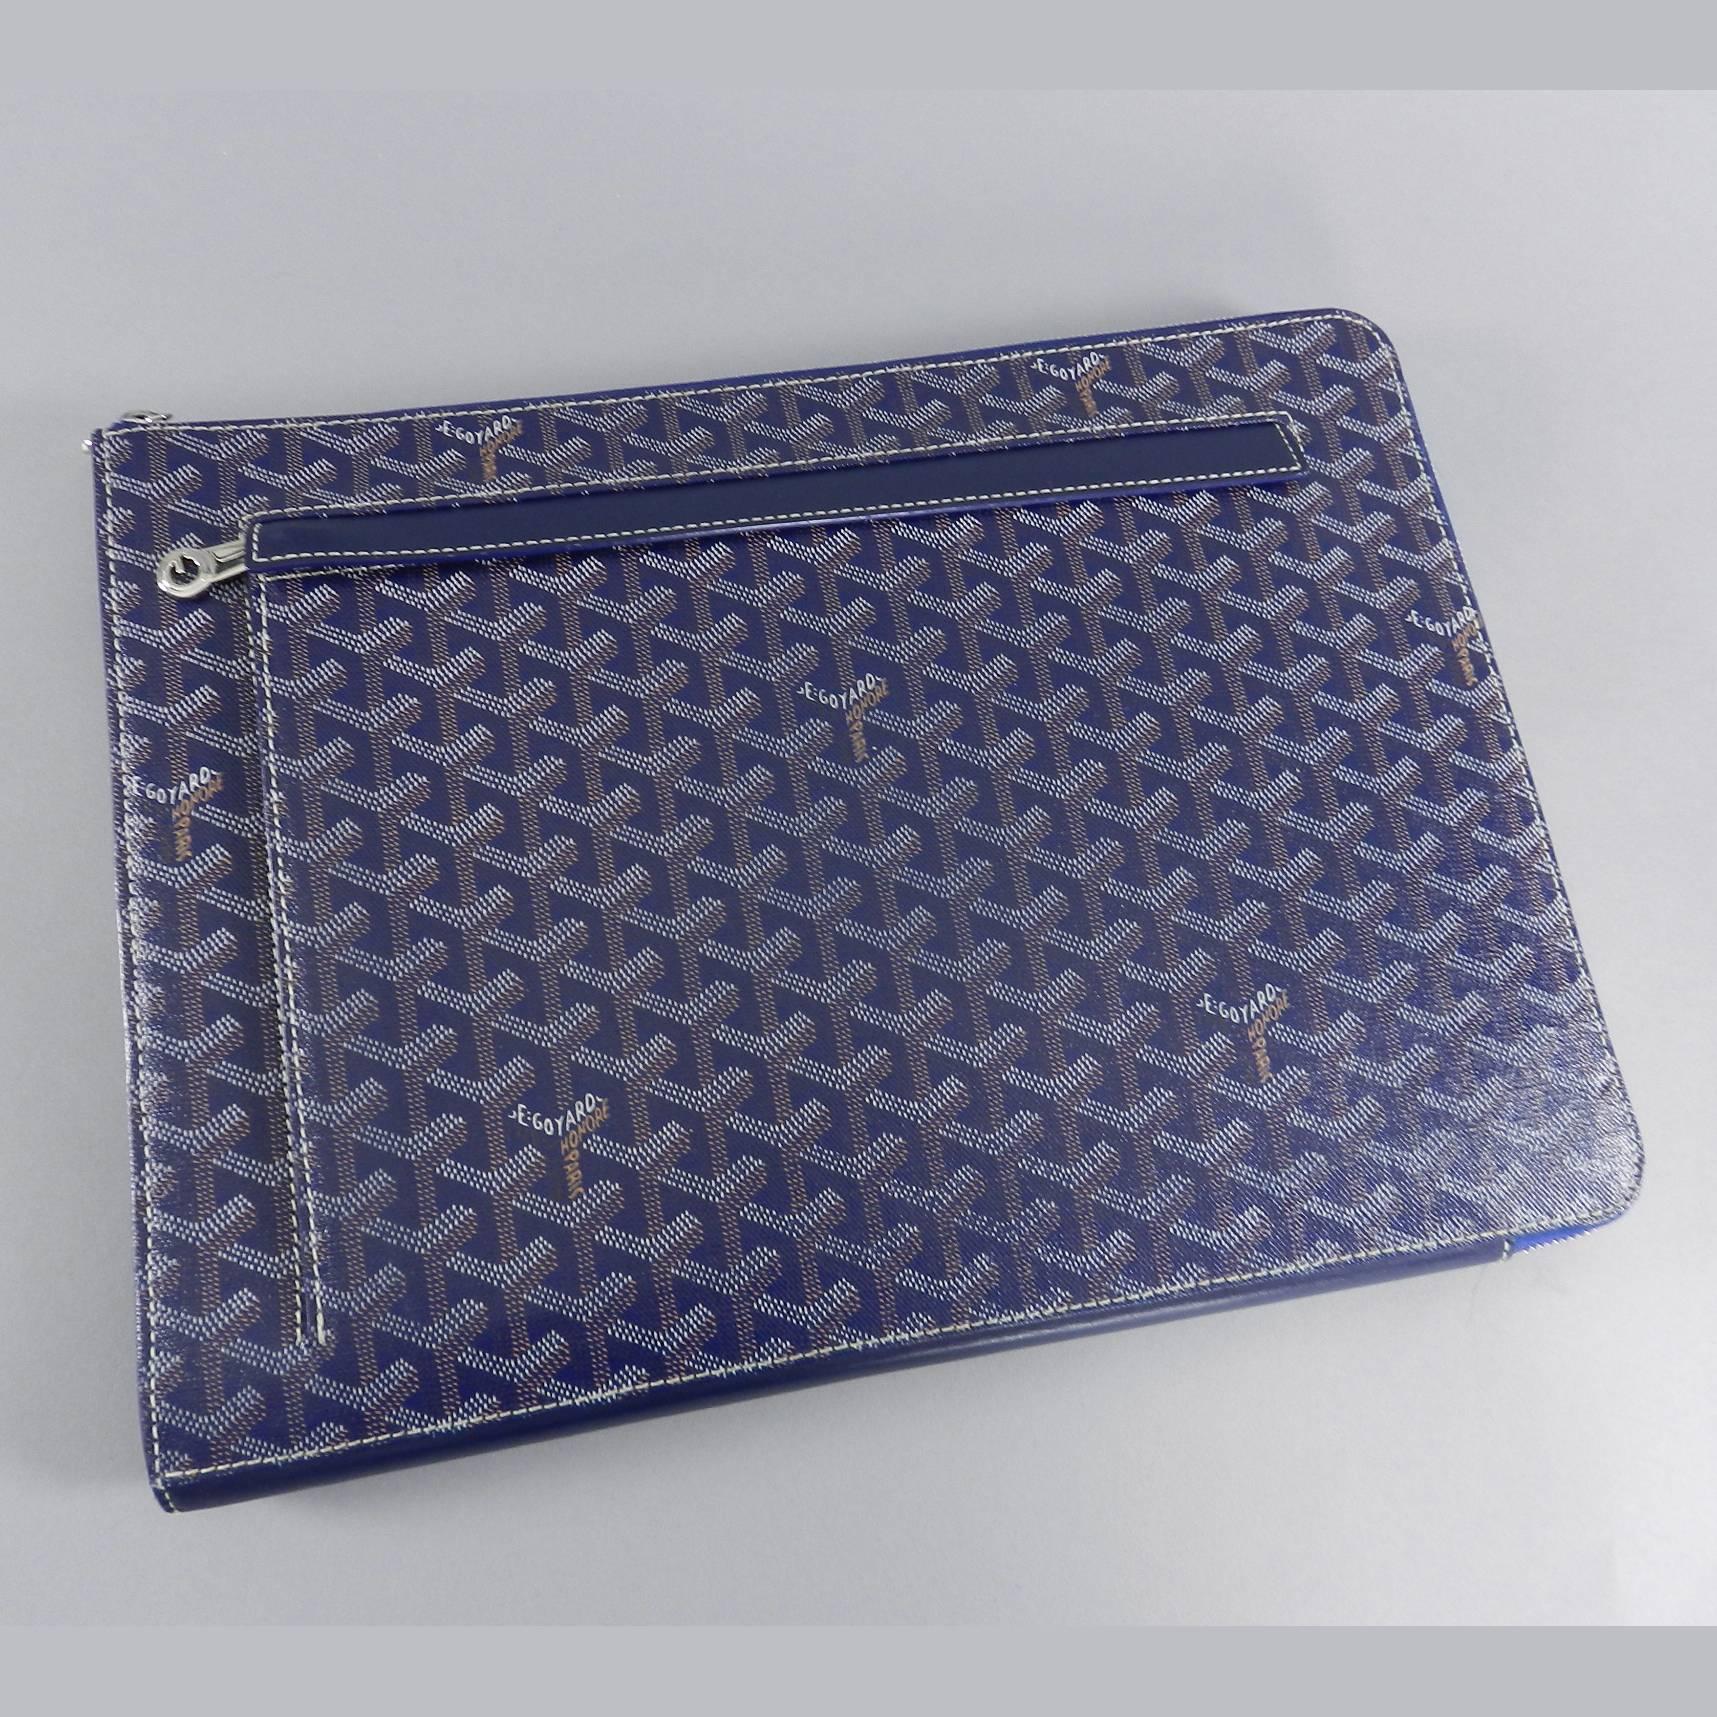 Goyard blue monogram canvas zippered portfolio bag. Silvertone metal hardware, one small zippered pocket on exterior, interior divider in yellow leather. Excellent pre-owned condition. Original owner purchased this in Japan. Measures 15